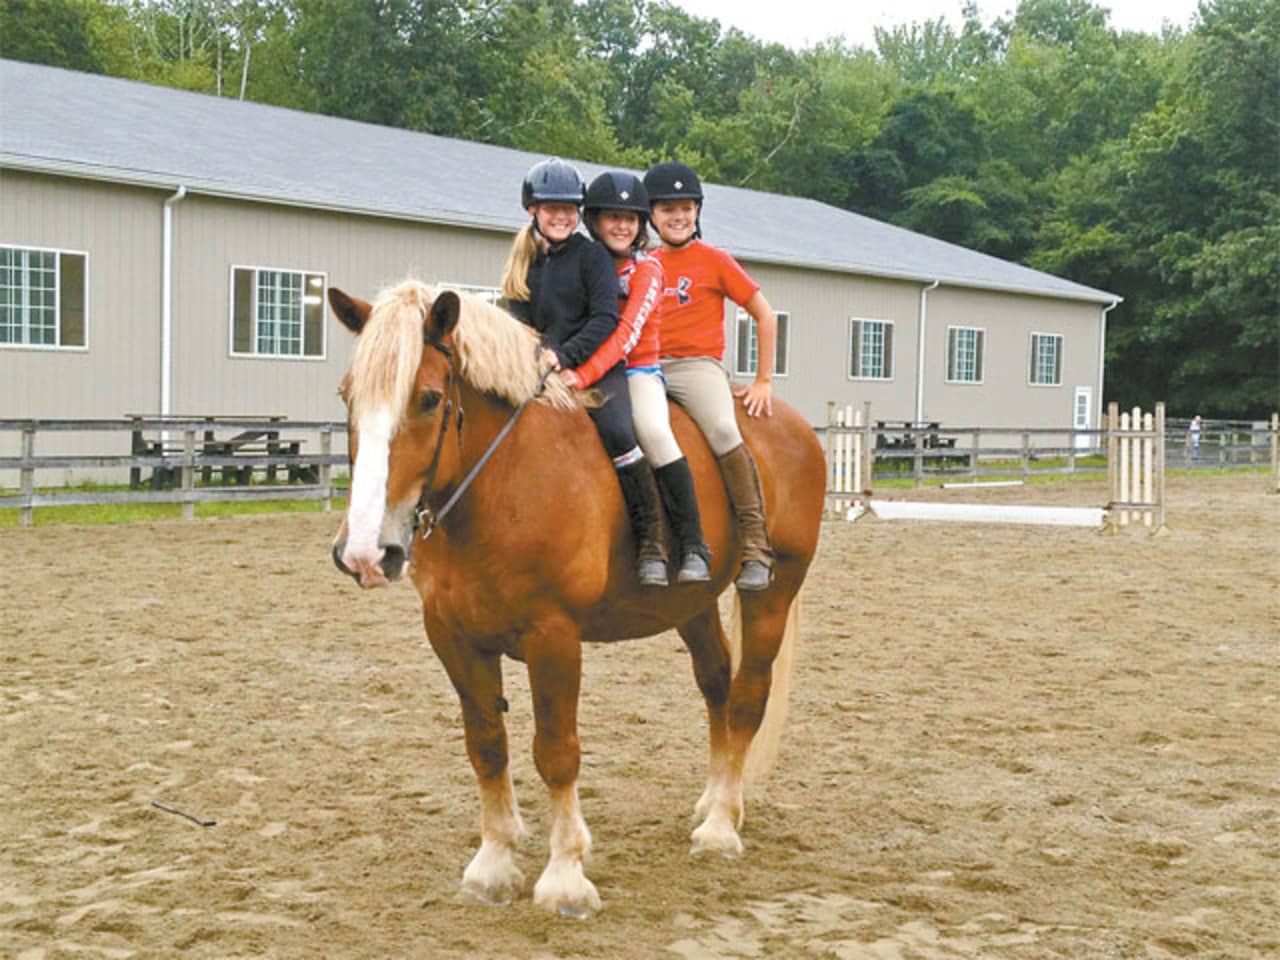 The New Canaan Mounted Troop